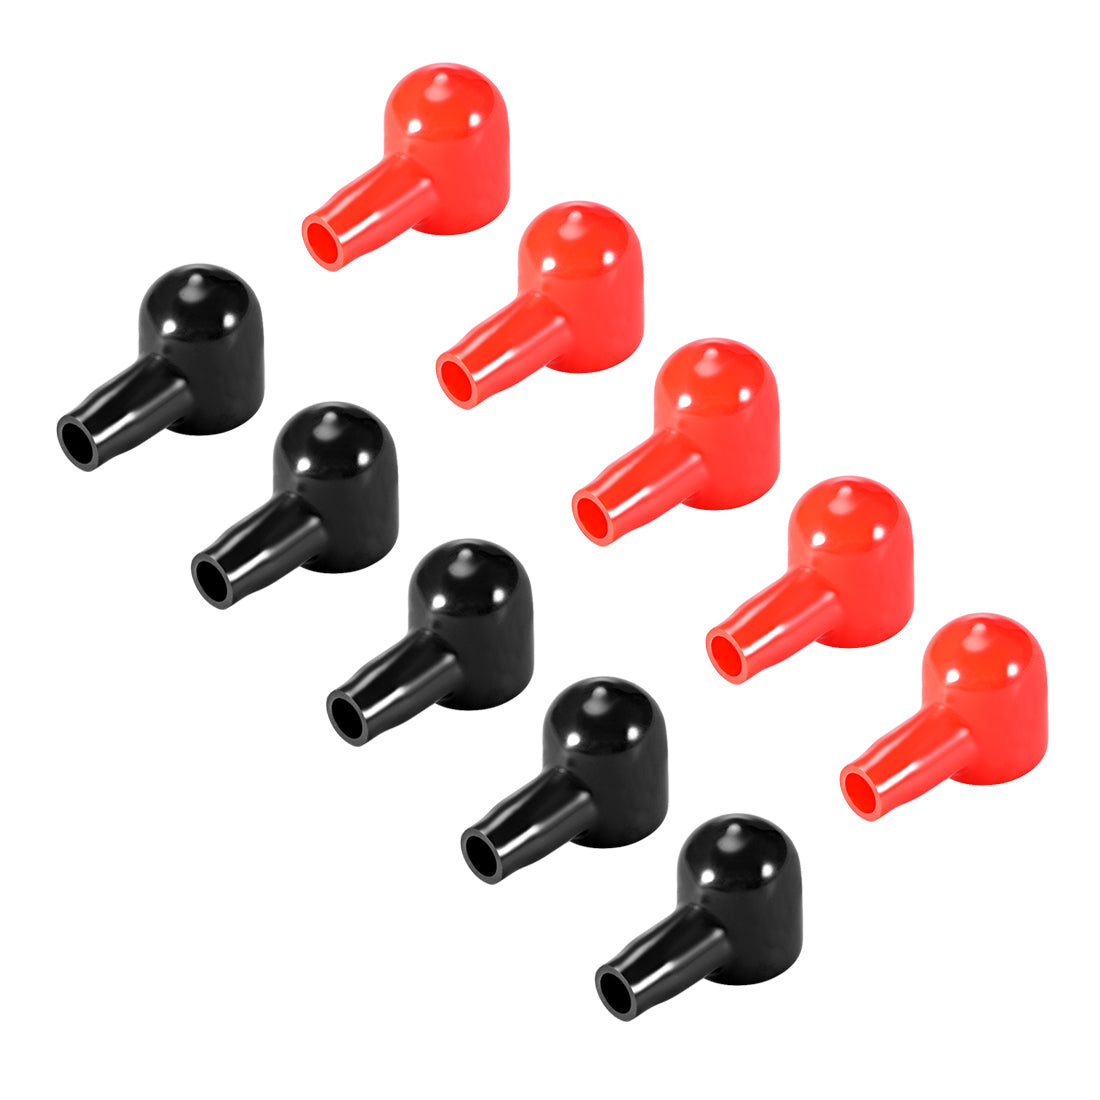 uxcell Uxcell Battery Terminal Insulating Rubber Protector Covers for 14mm Terminal 6mm Cable Red Black 5 Pairs